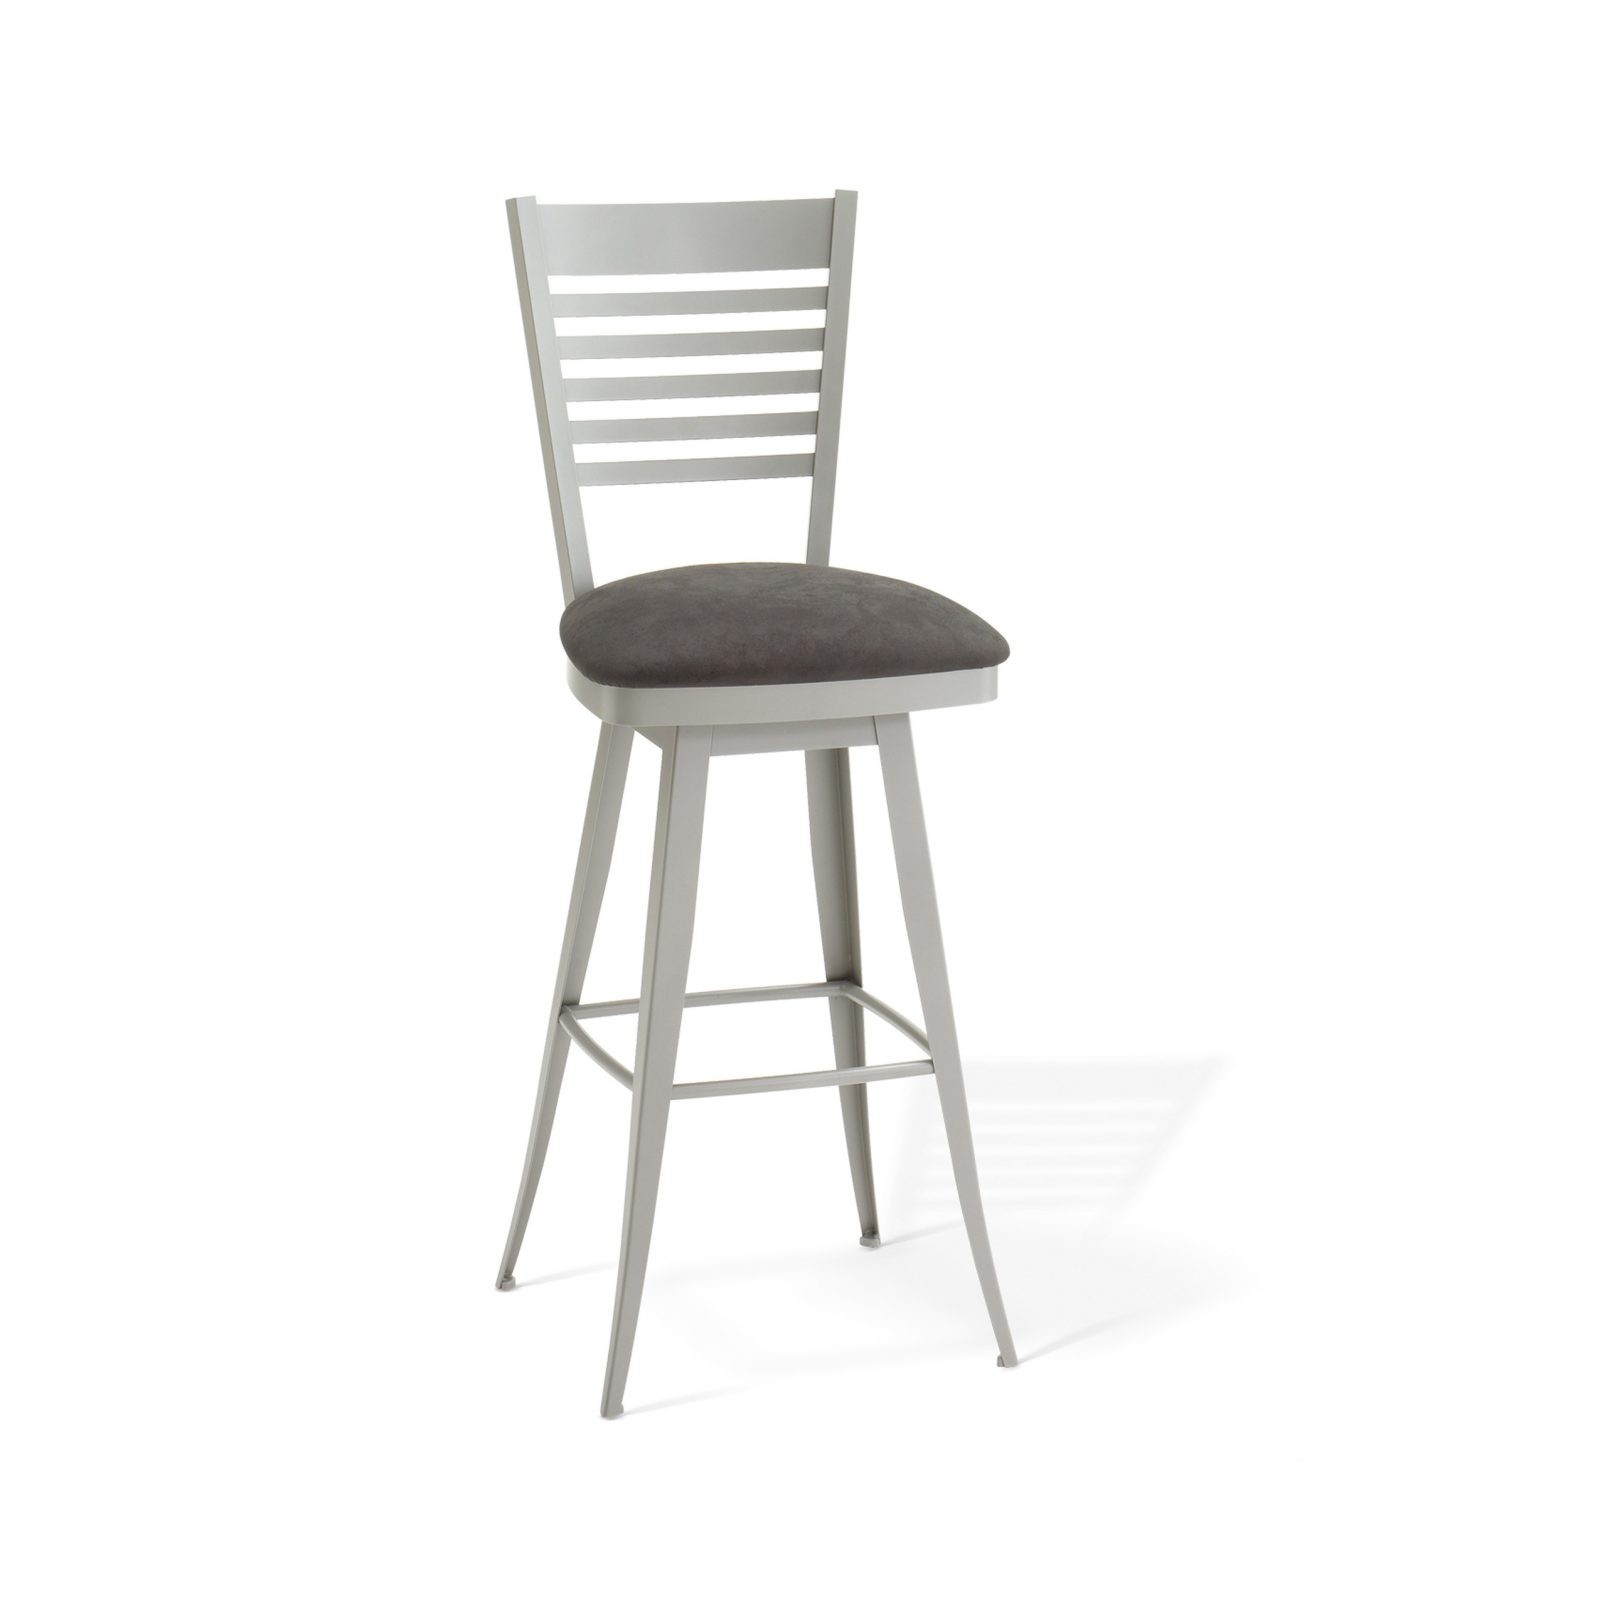 Metal Finish: 14 Platina (discontinued) • Seat Covering: Discontinued